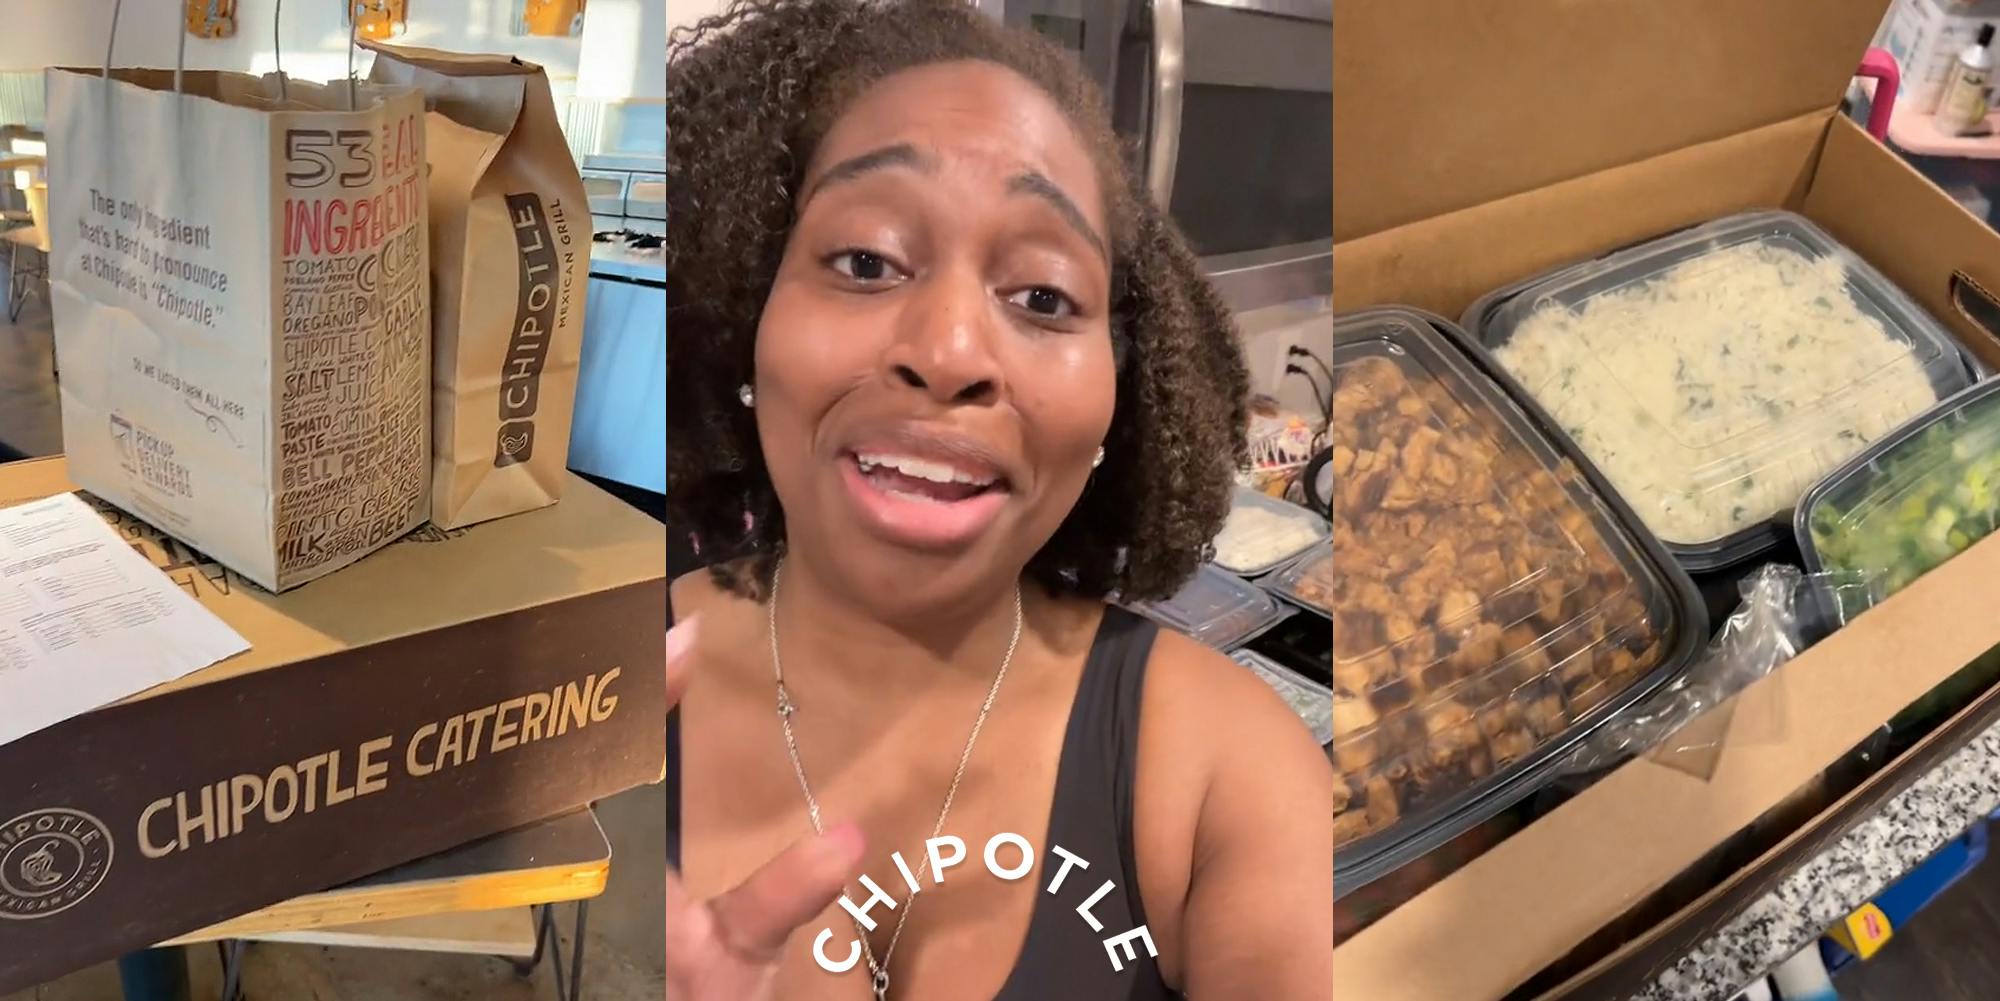 Chipotle Catering box with bags on top (l) woman speaking in kitchen with Chipotle logo at bottom (c) Chipotle food in containers in box (r)